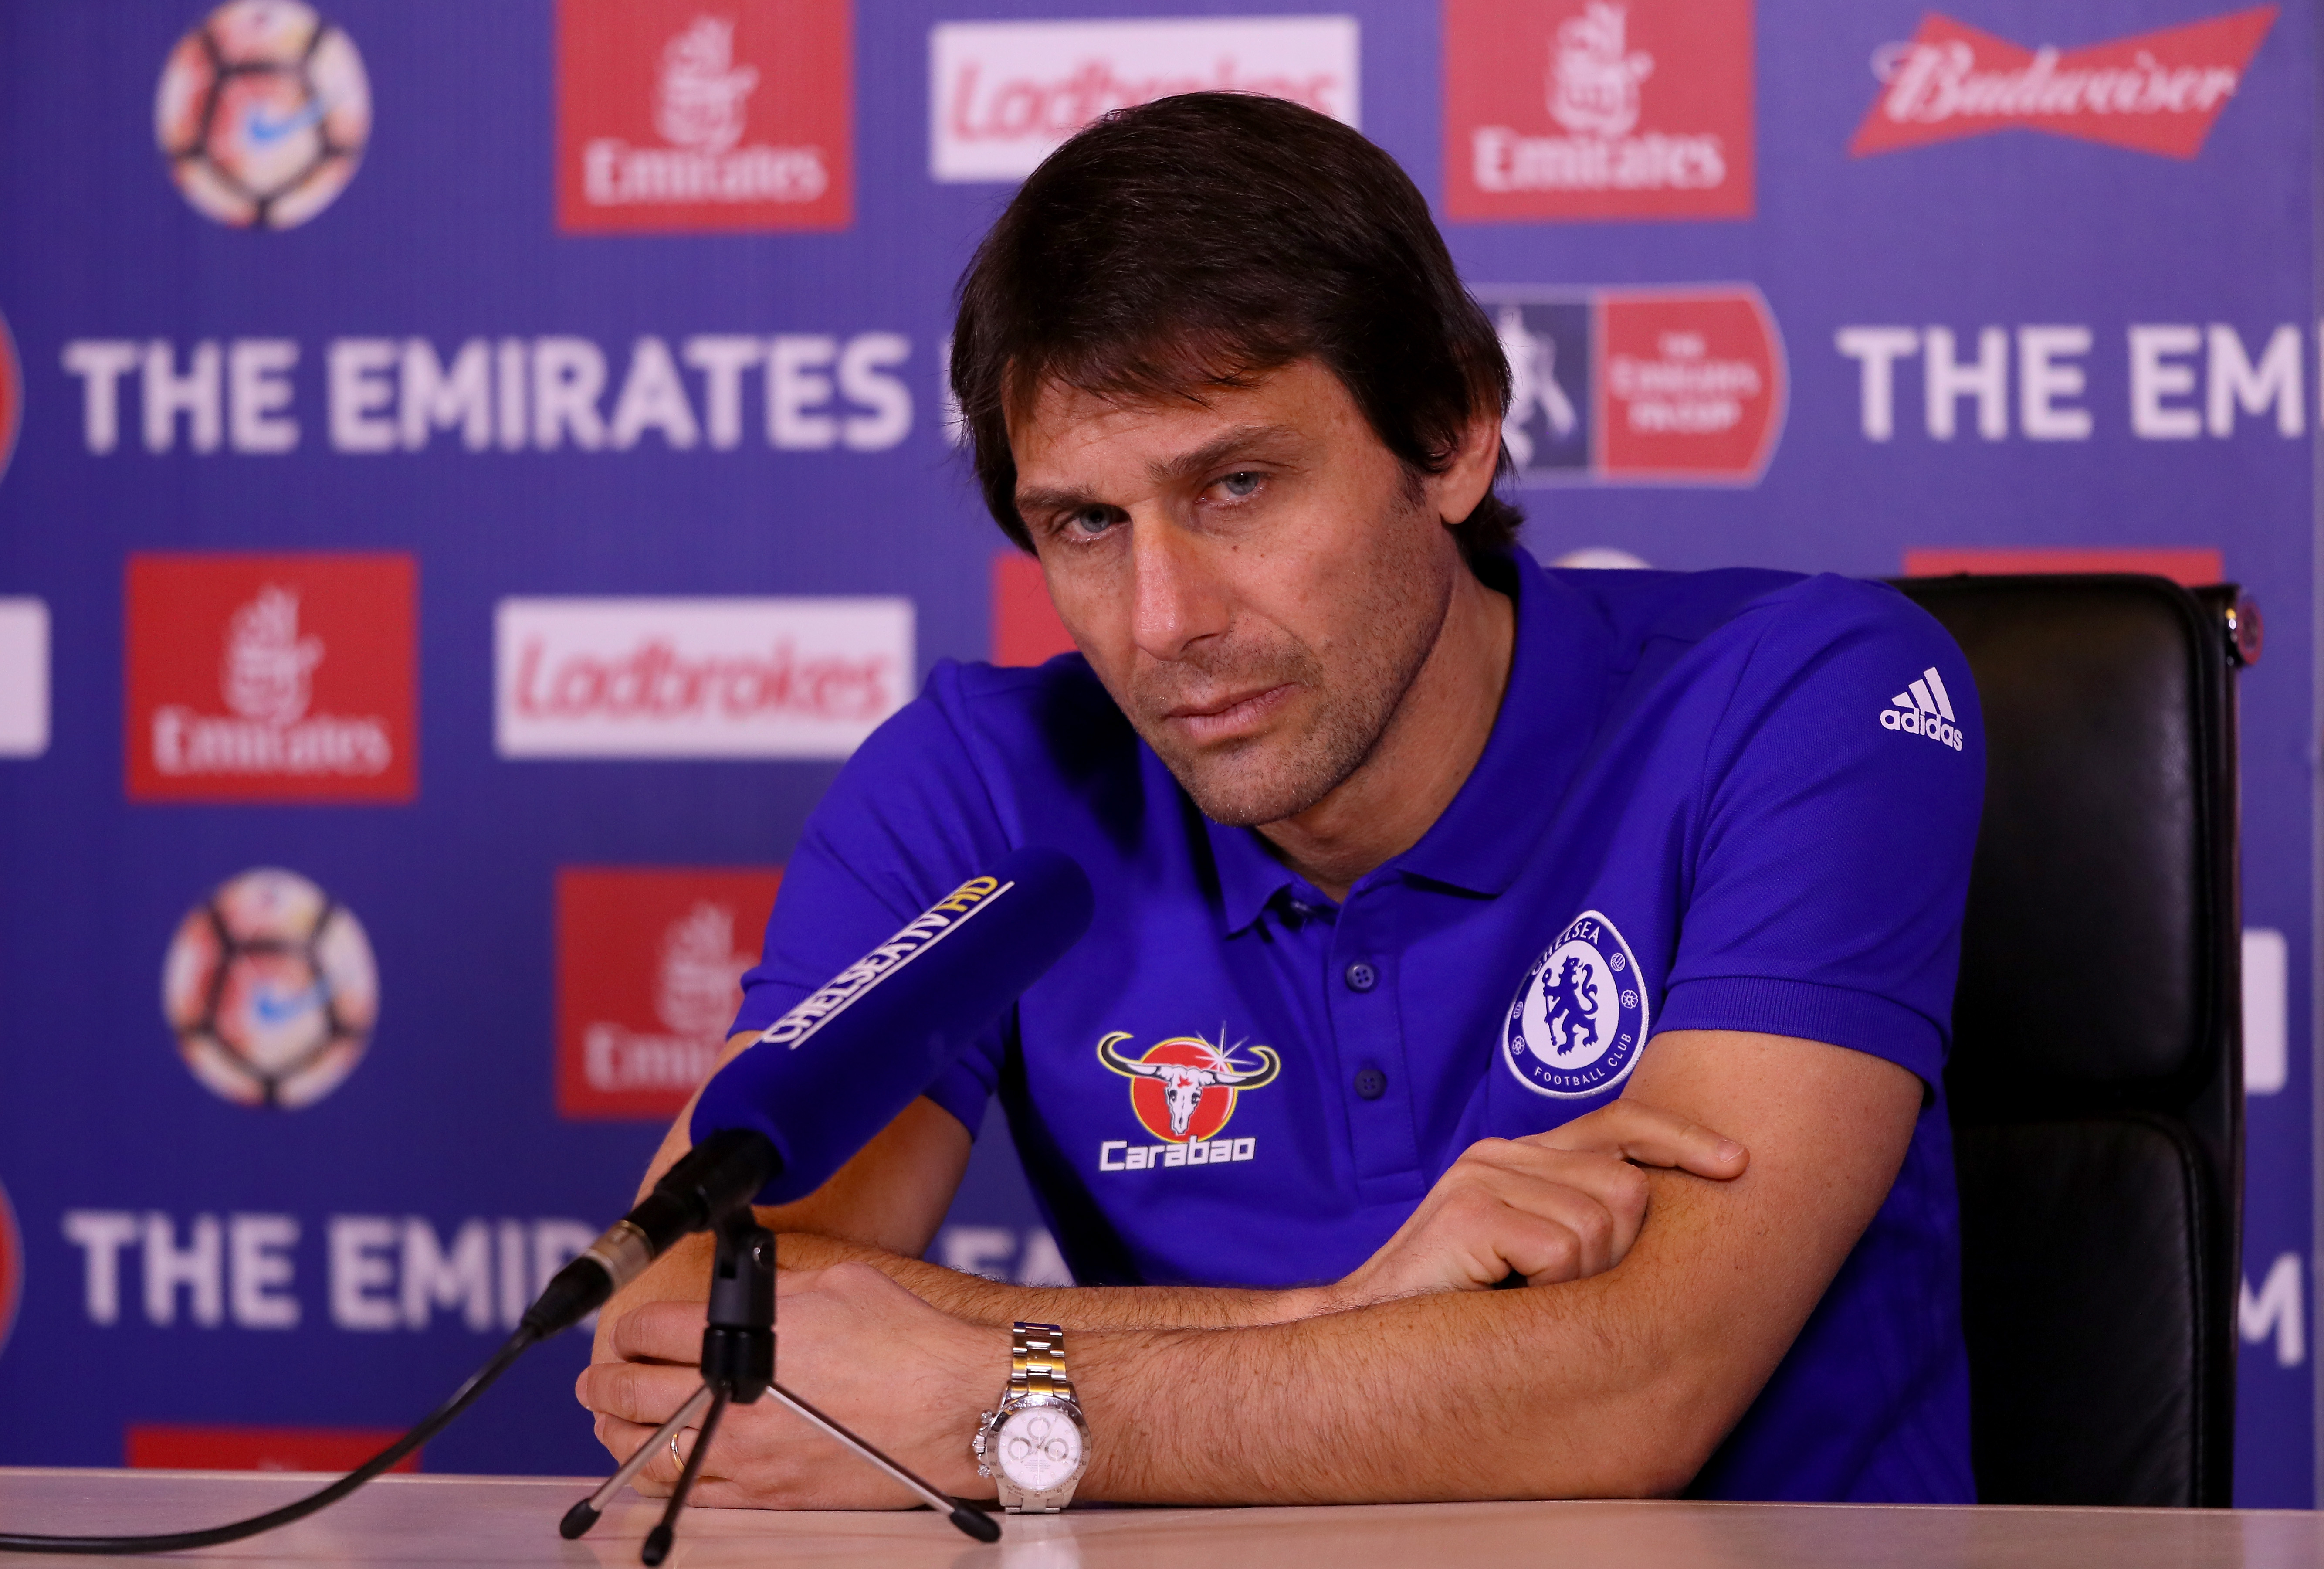 COBHAM, ENGLAND - JANUARY 06:  Antonio Conte, Chelsea mananger, is pictured during a press conference at Chelsea Training Ground on January 6, 2017 in Cobham, England.  (Photo by Andrew Redington/Getty Images)